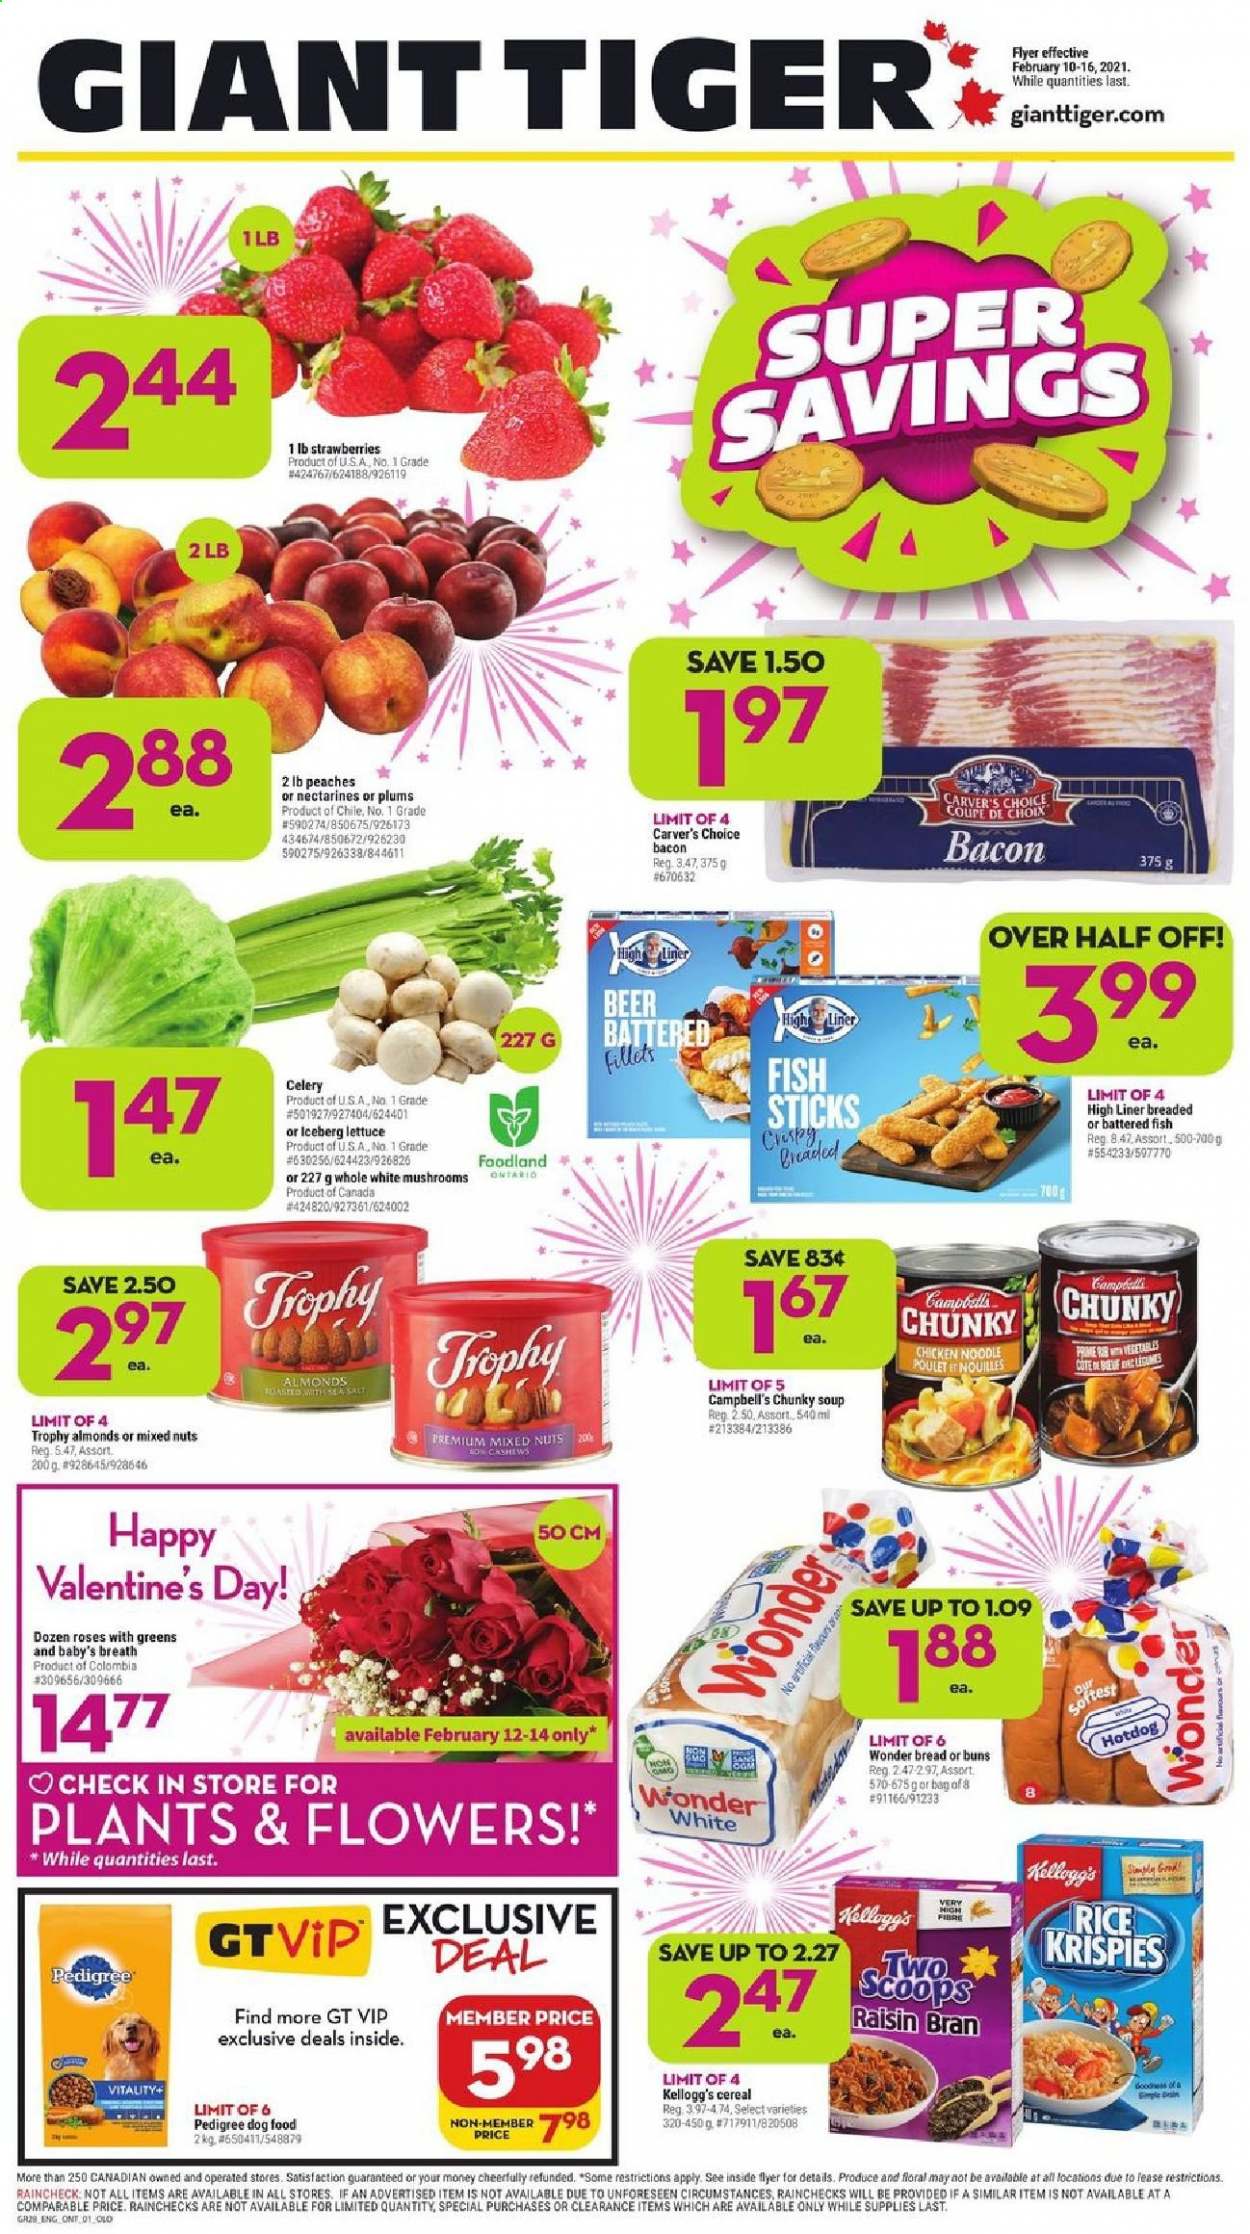 thumbnail - Giant Tiger Flyer - February 10, 2021 - February 16, 2021 - Sales products - mushrooms, bread, hot dog rolls, buns, celery, lettuce, nectarines, strawberries, plums, peaches, fish, fish fingers, fish sticks, Campbell's, hot dog, soup, noodles, bacon, Kellogg's, salt, cereals, Rice Krispies, Raisin Bran, almonds, cashews, mixed nuts, beer, animal food, dog food, Pedigree, trophy cup, rose. Page 1.